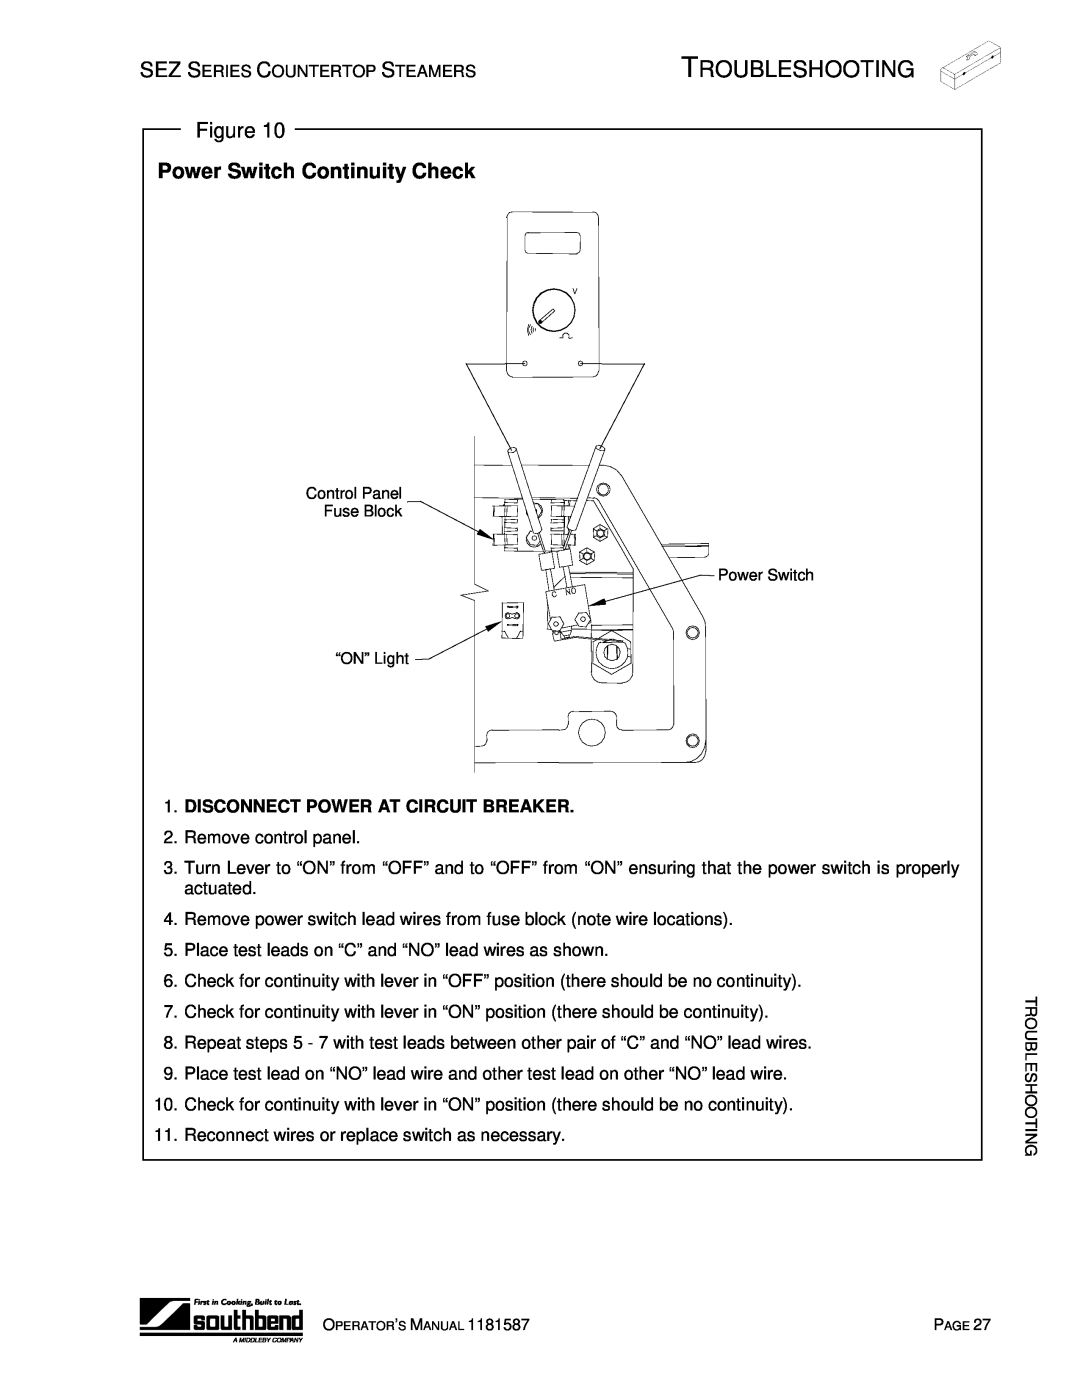 Southbend SEZ-3, SEZ-5 manual Power Switch Continuity Check, Troubleshooting, Disconnect Power At Circuit Breaker 